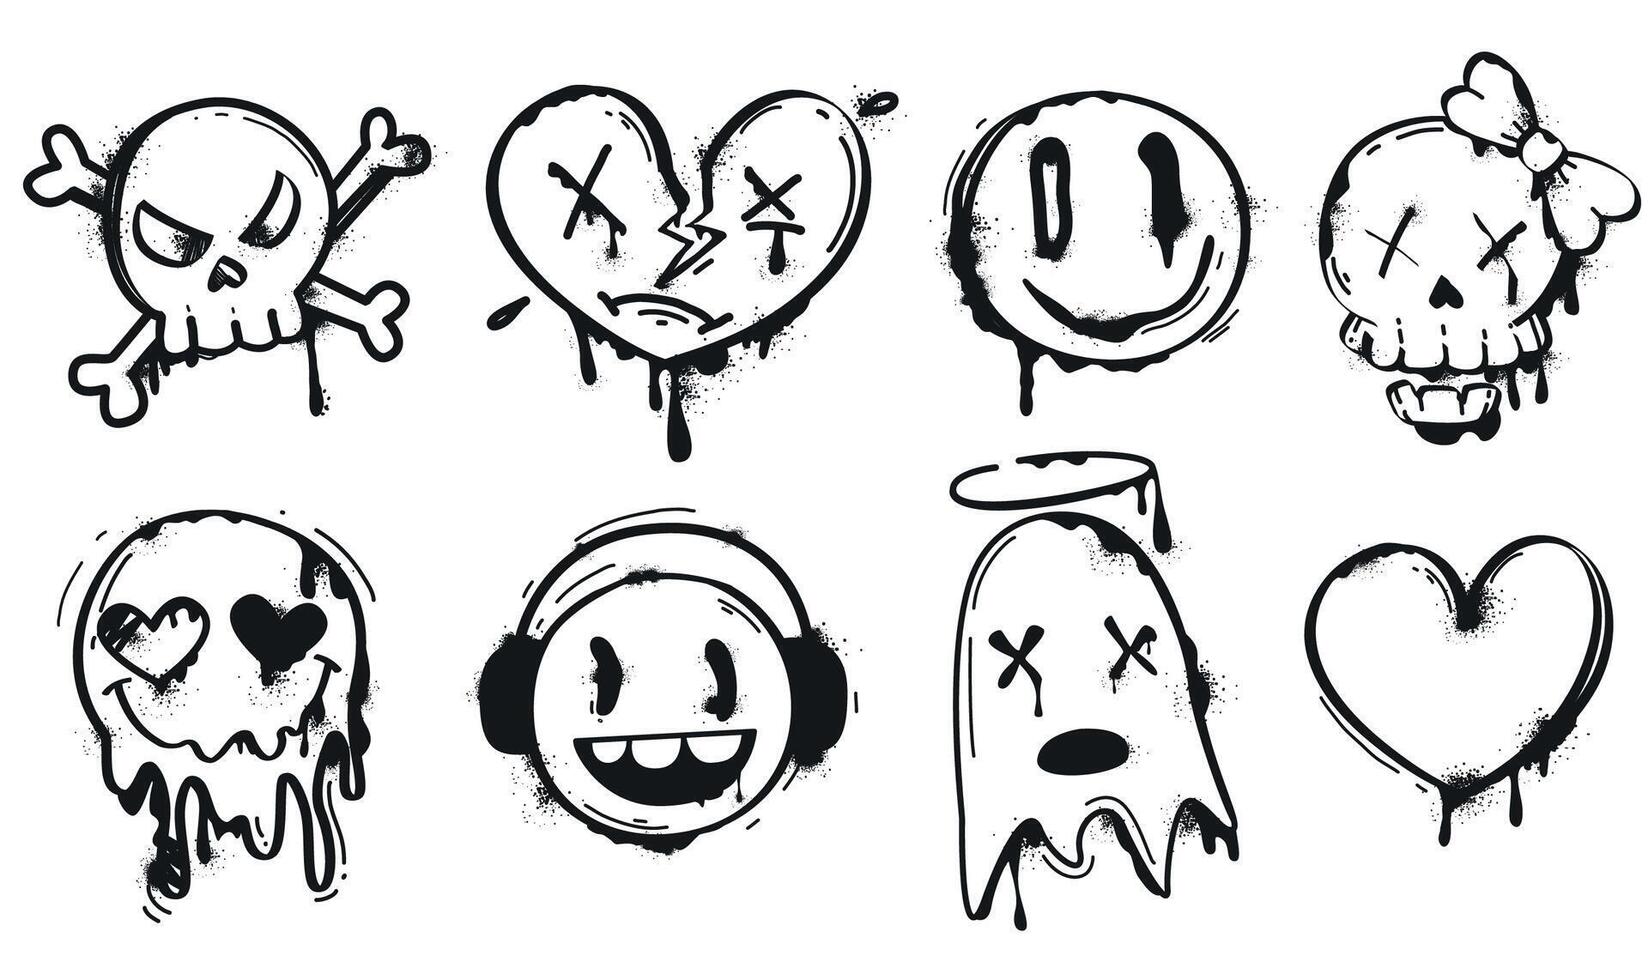 Black spray paint graffiti emoji of smiling face, heart, skull and ghost. Street art set of ink drip splatter face emoticon characters in hand drawing style. Painted urban elements on white background vector